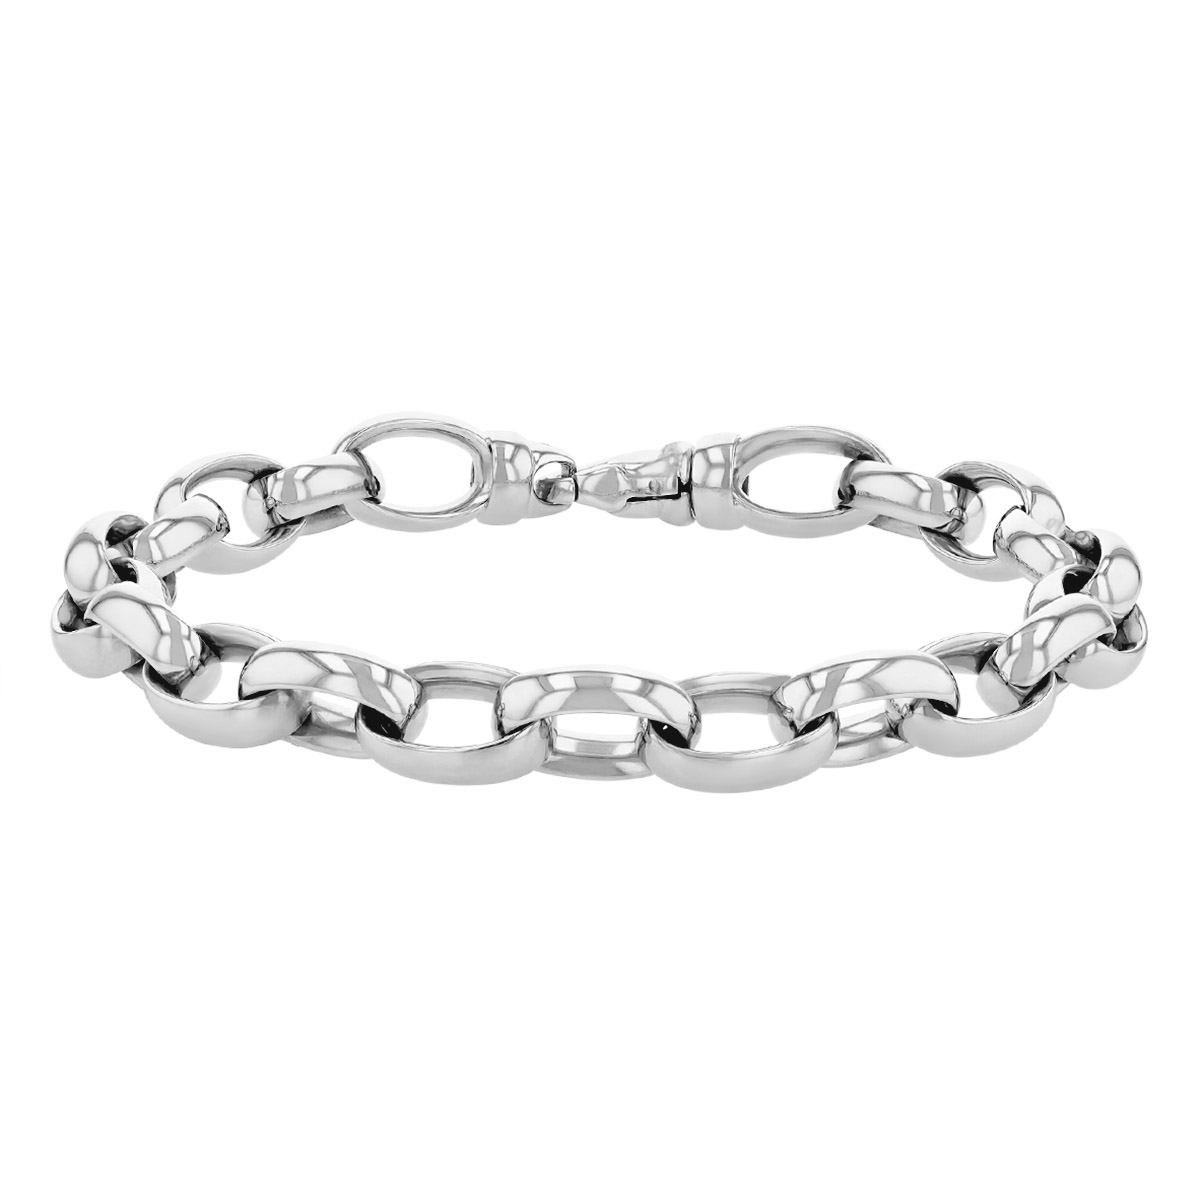 Roberto Coin White Gold Large Link Chain Bracelet, 9